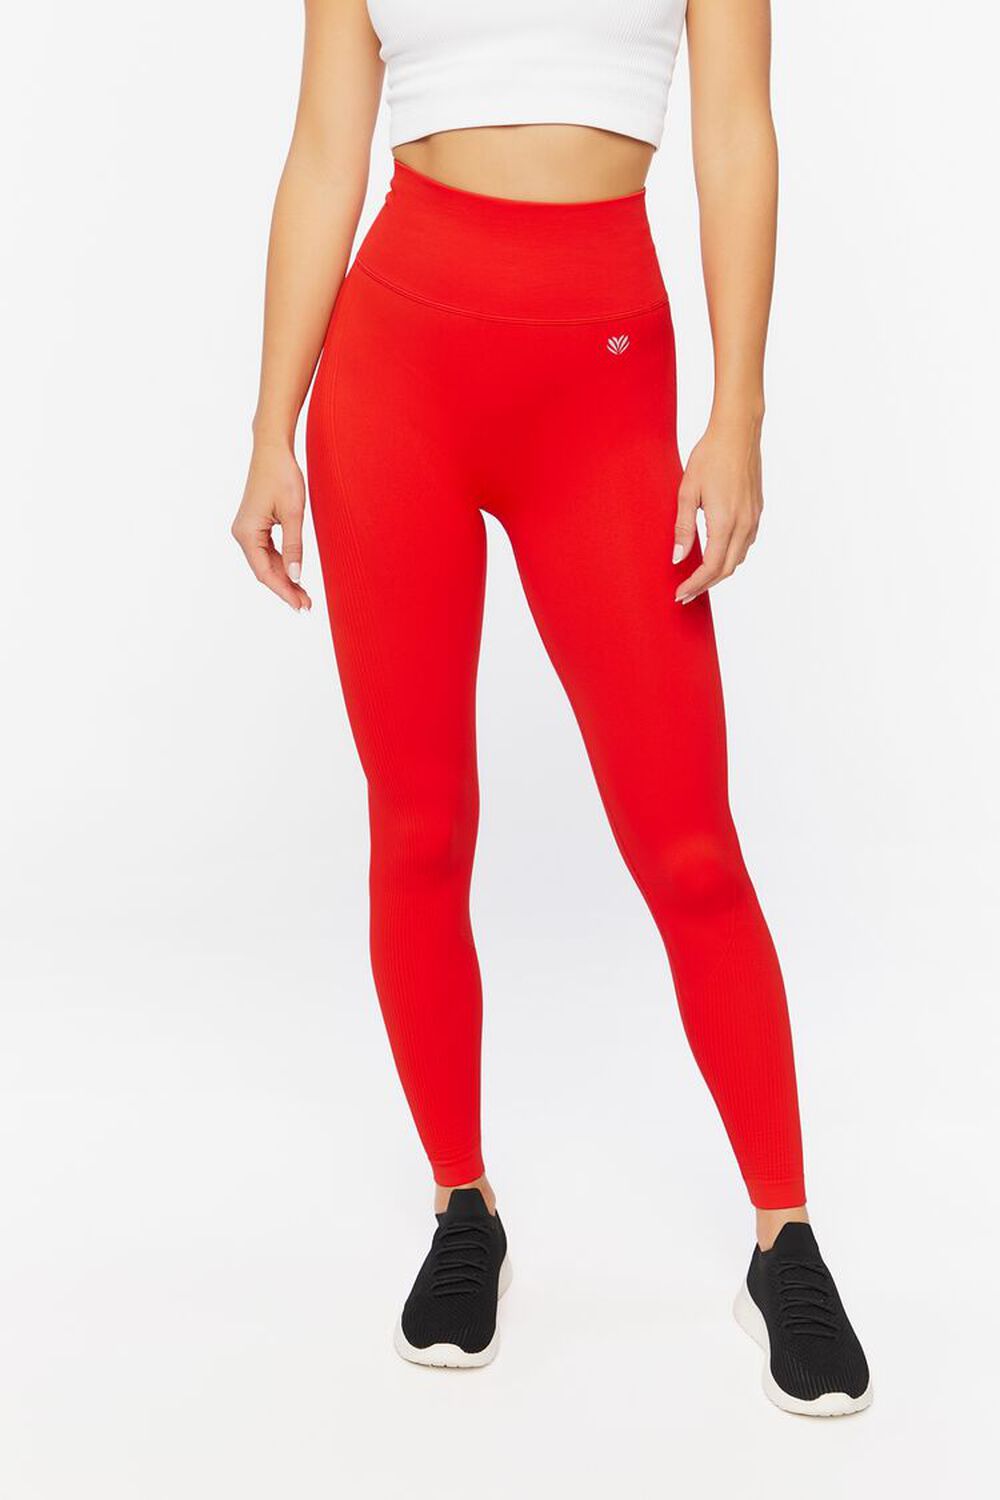 FIERY RED Active Seamless High-Rise Leggings, image 2